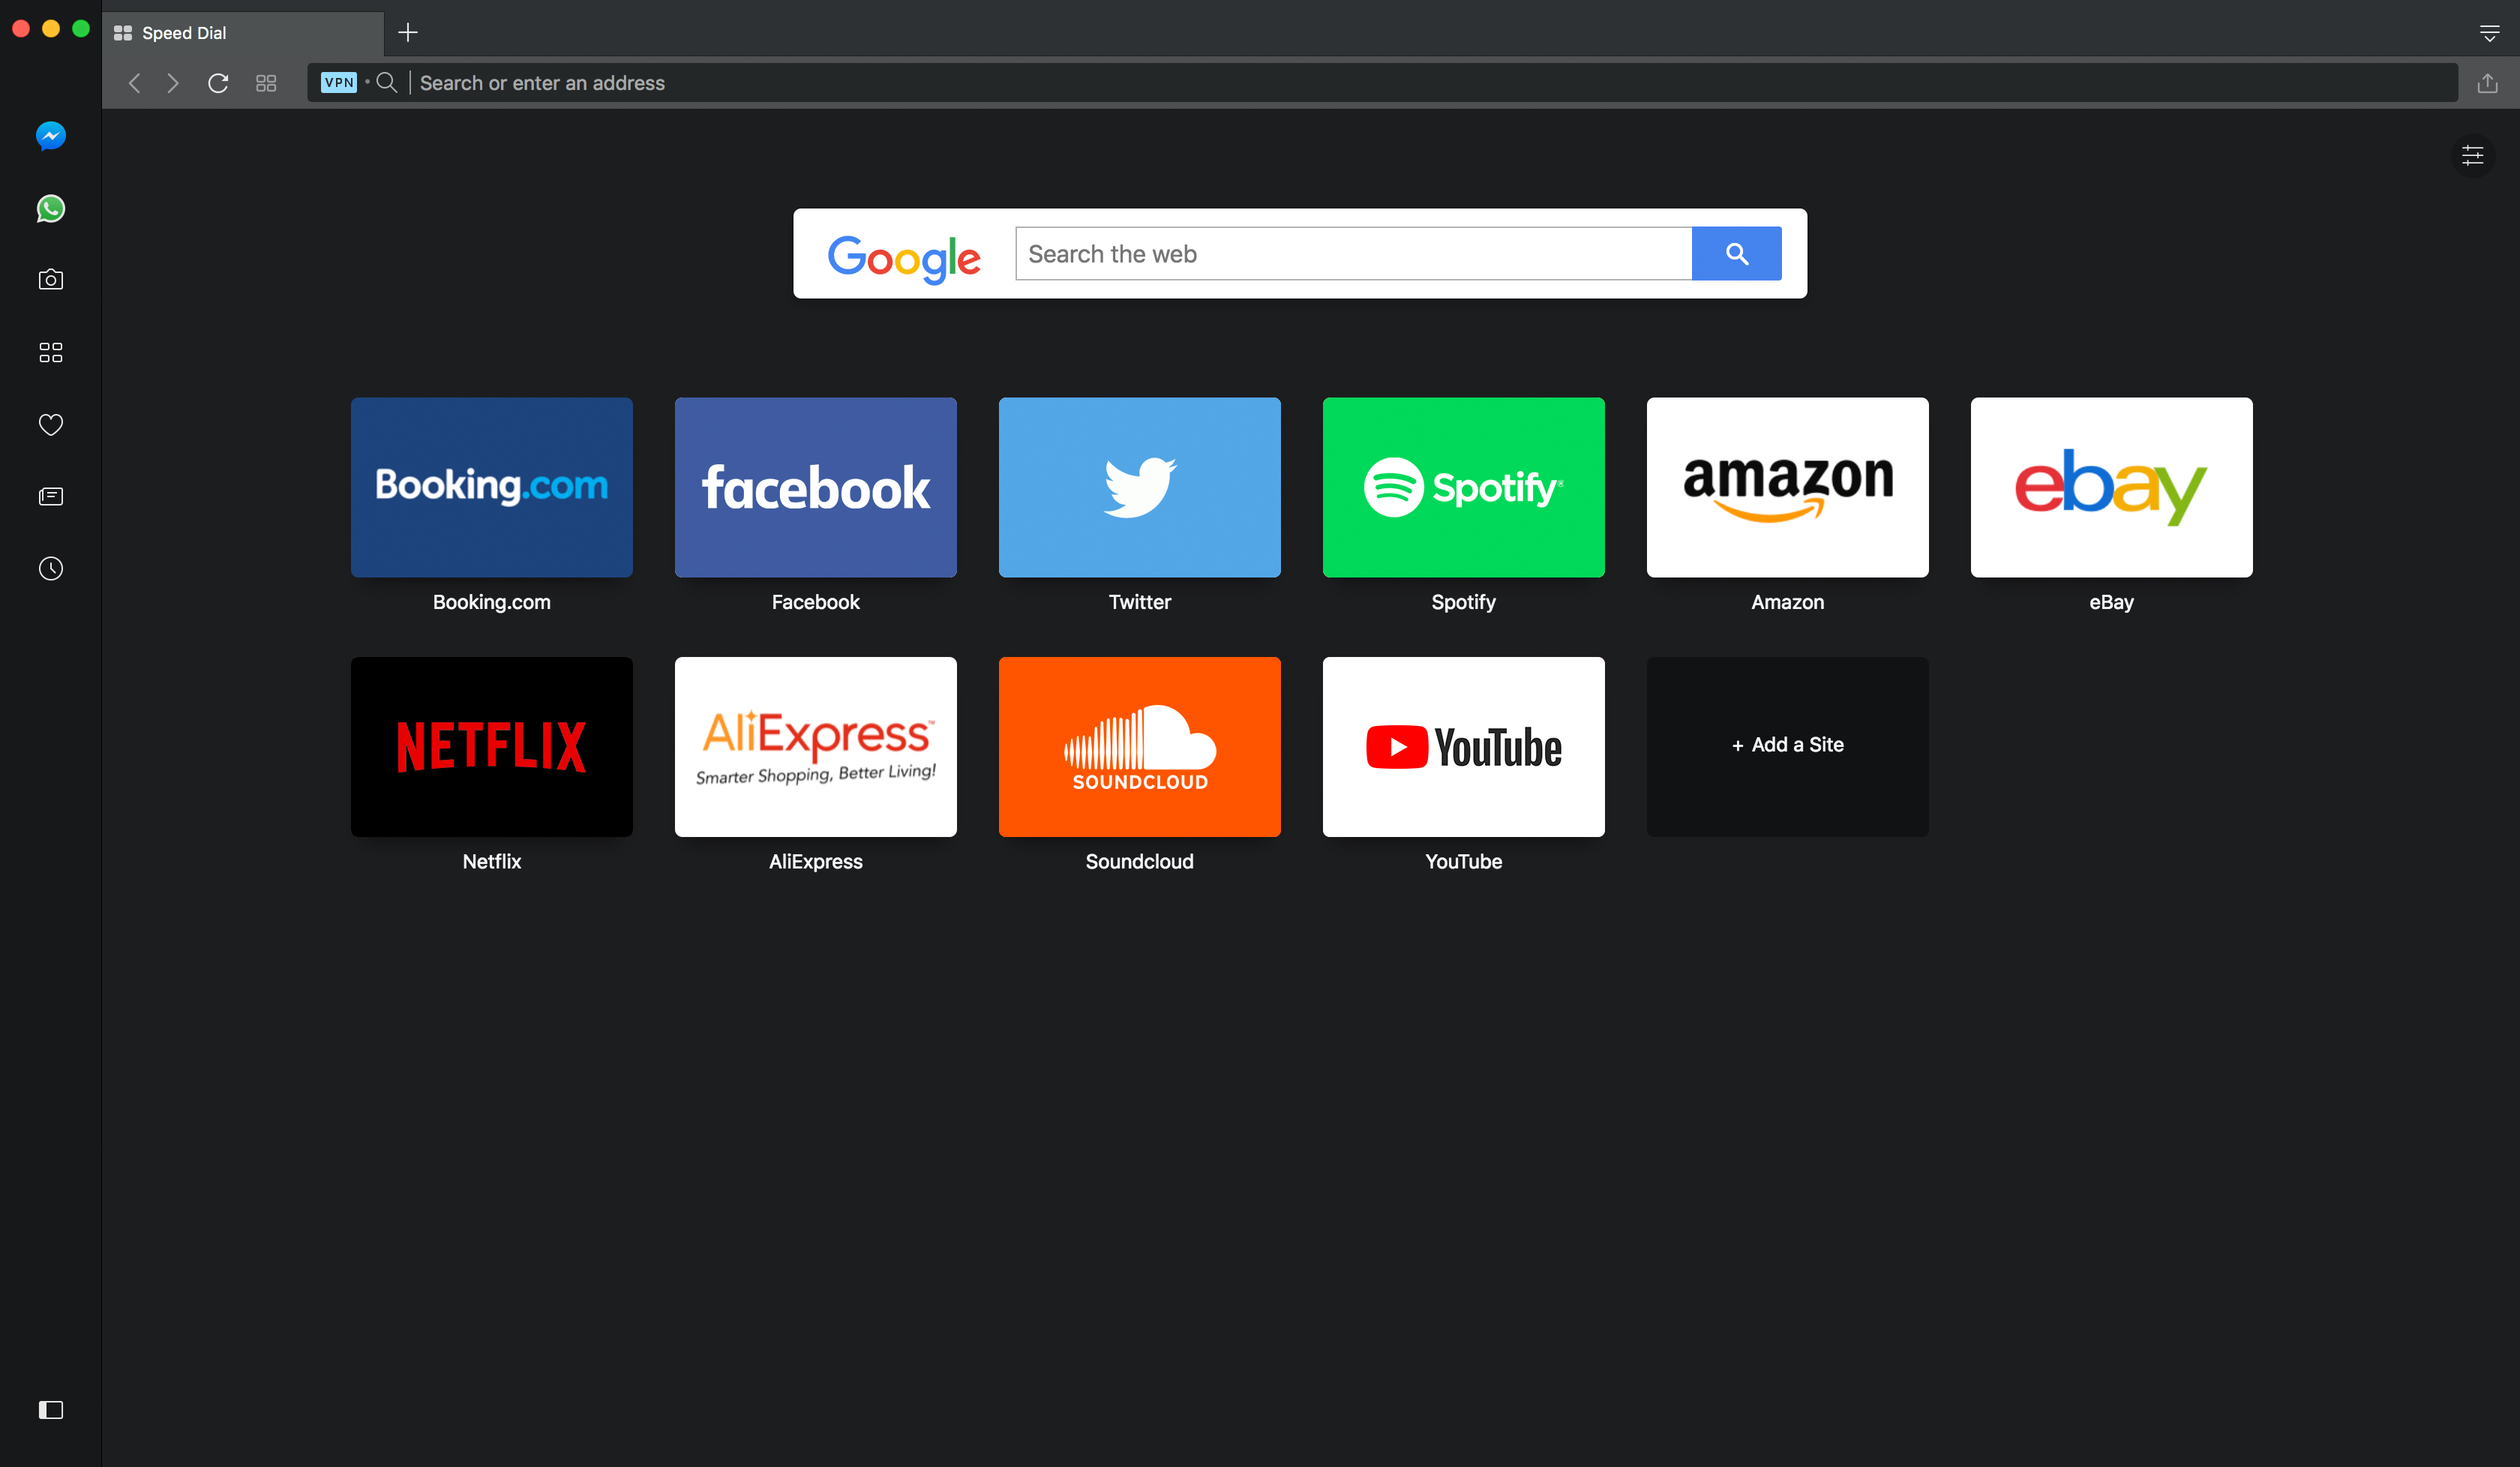 opera web browser for windows 7